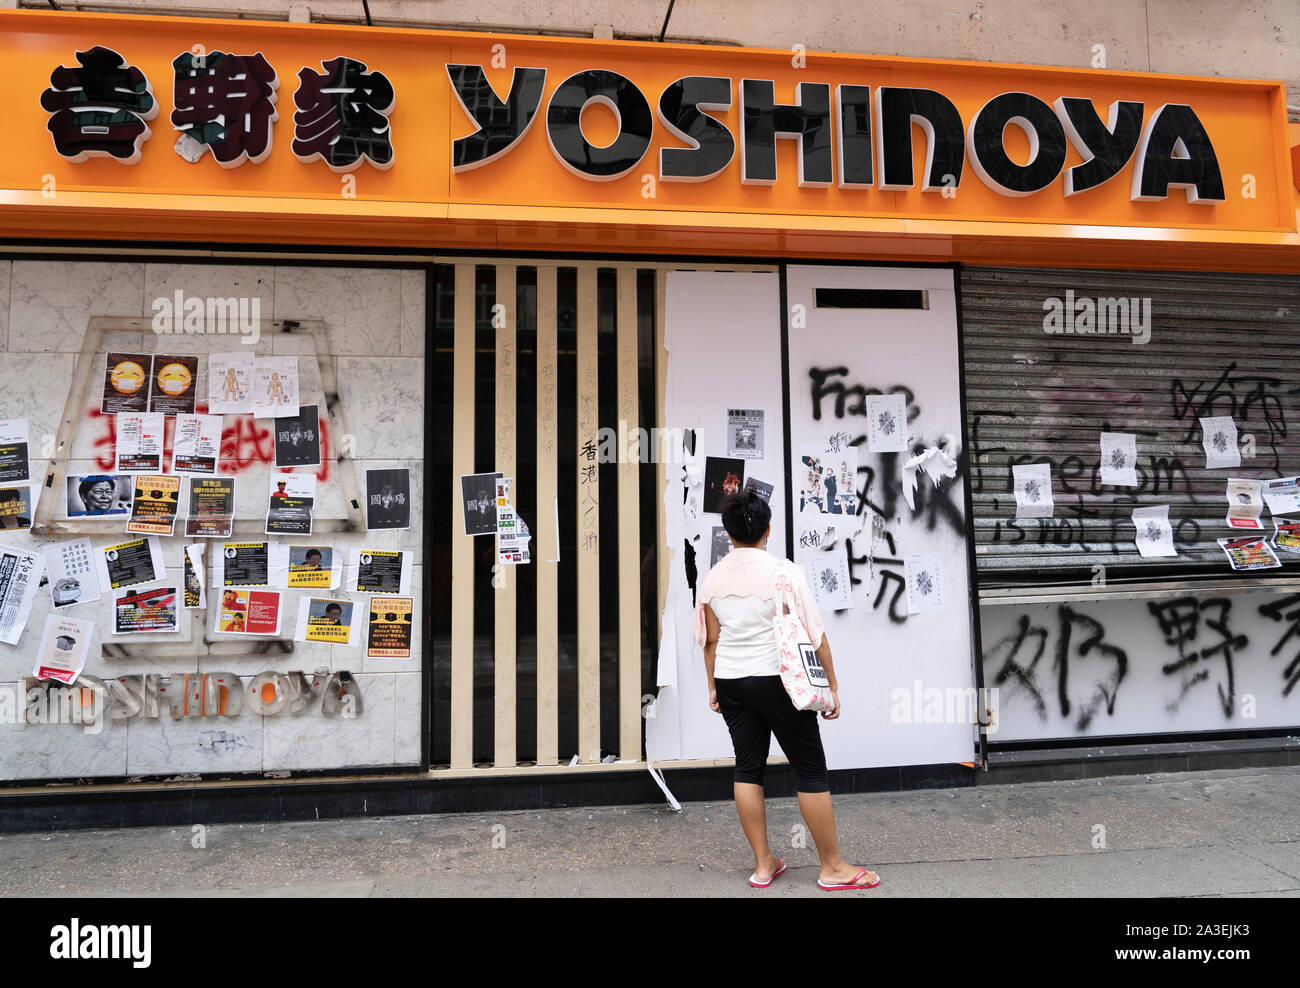 Kowloon, Hong Kong, China,. 7 October, 2019. After a night of violent confrontations between police and pro-democracy protestors in MongKok and YauMaTei in Kowloon, many MTR railway stations and what are thought to be pro-Beijing business franchises were vandalised. Pic; Yoshinoya restaurant vandalised. Stock Photo